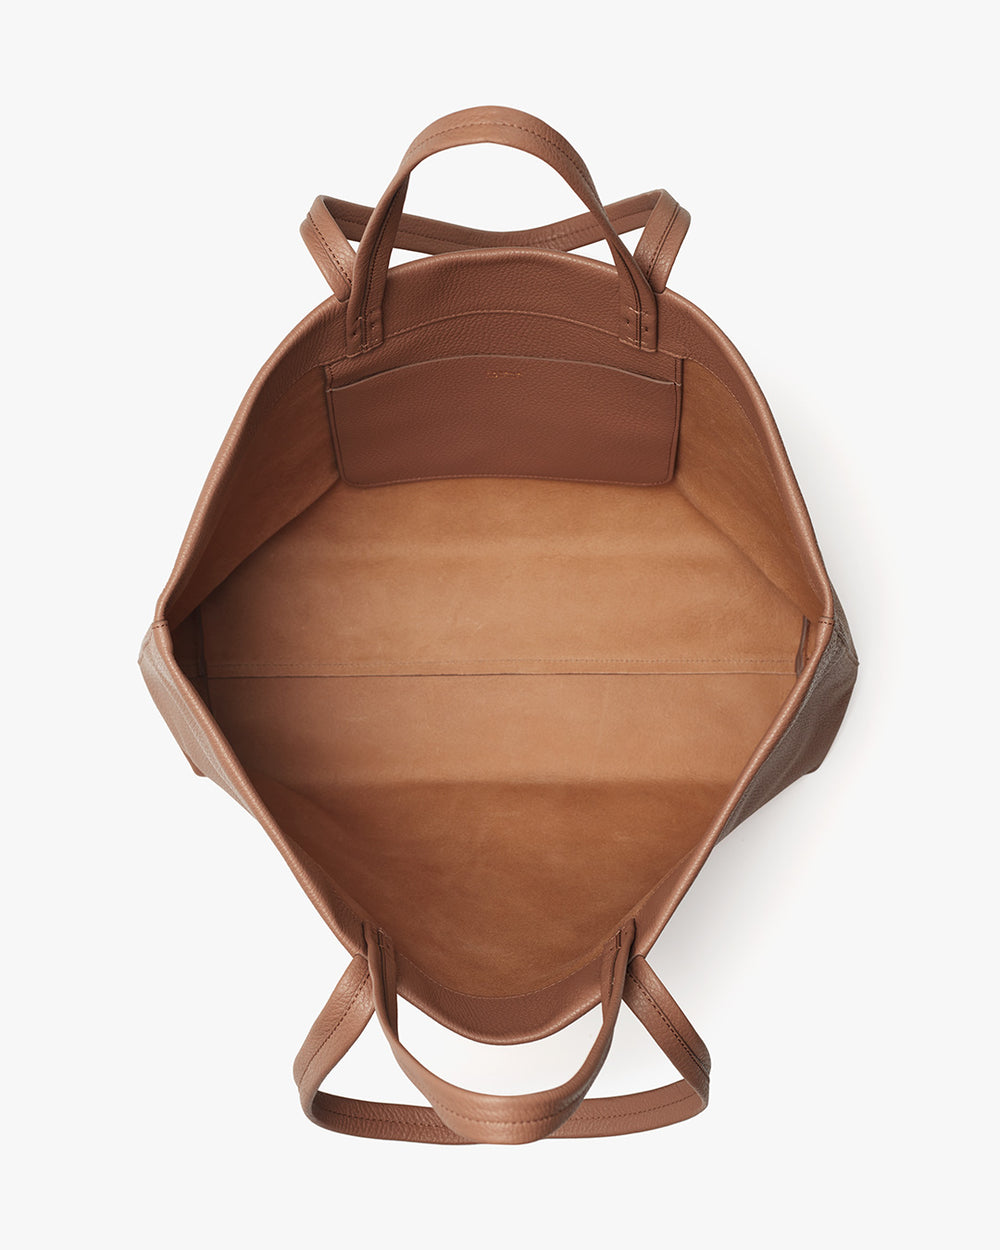 Top view of an open, empty leather bag with handles.